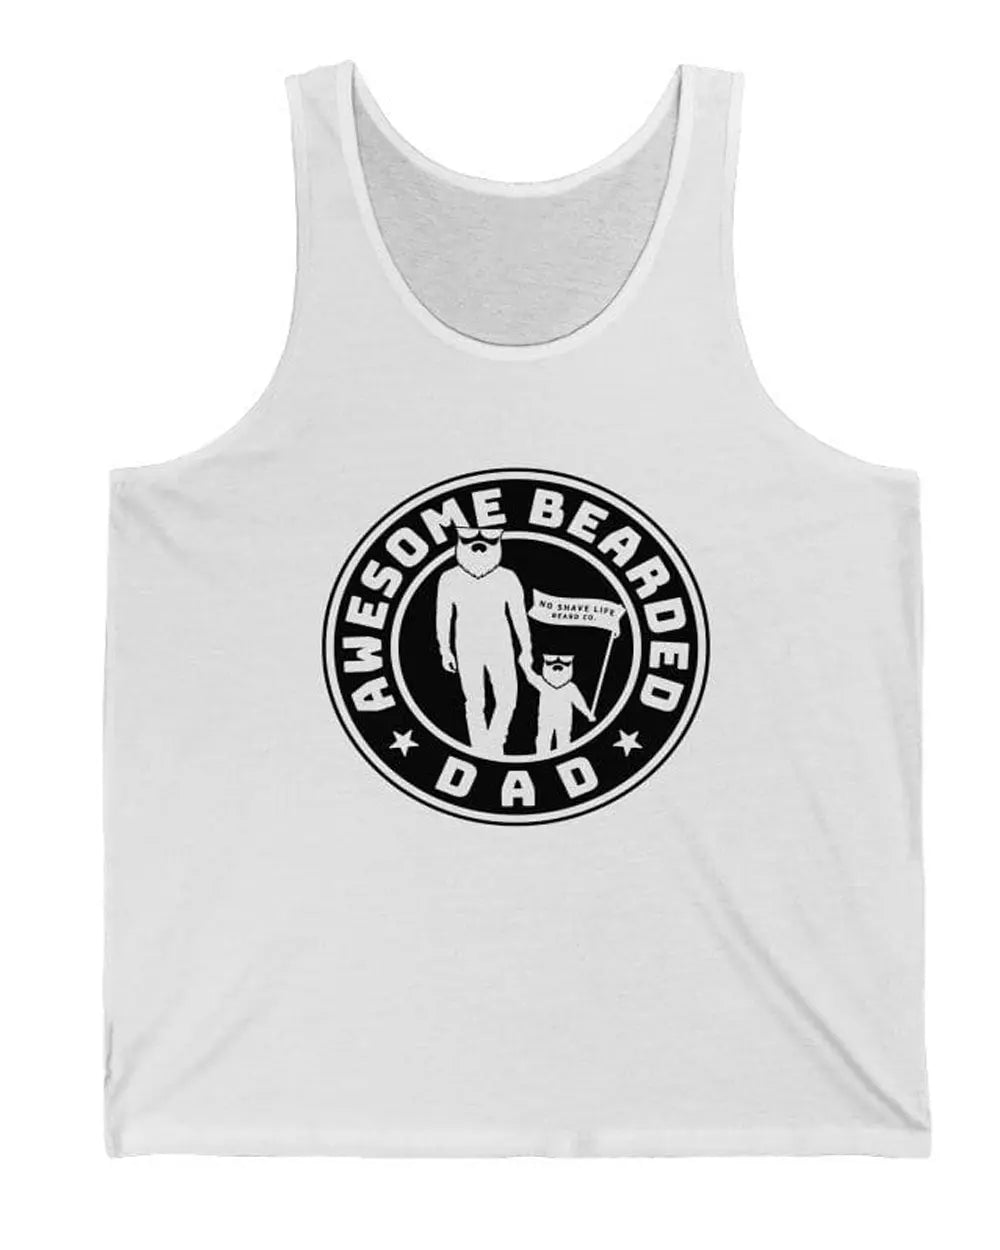 AWESOME BEARDED DAD White Men's Tank Top